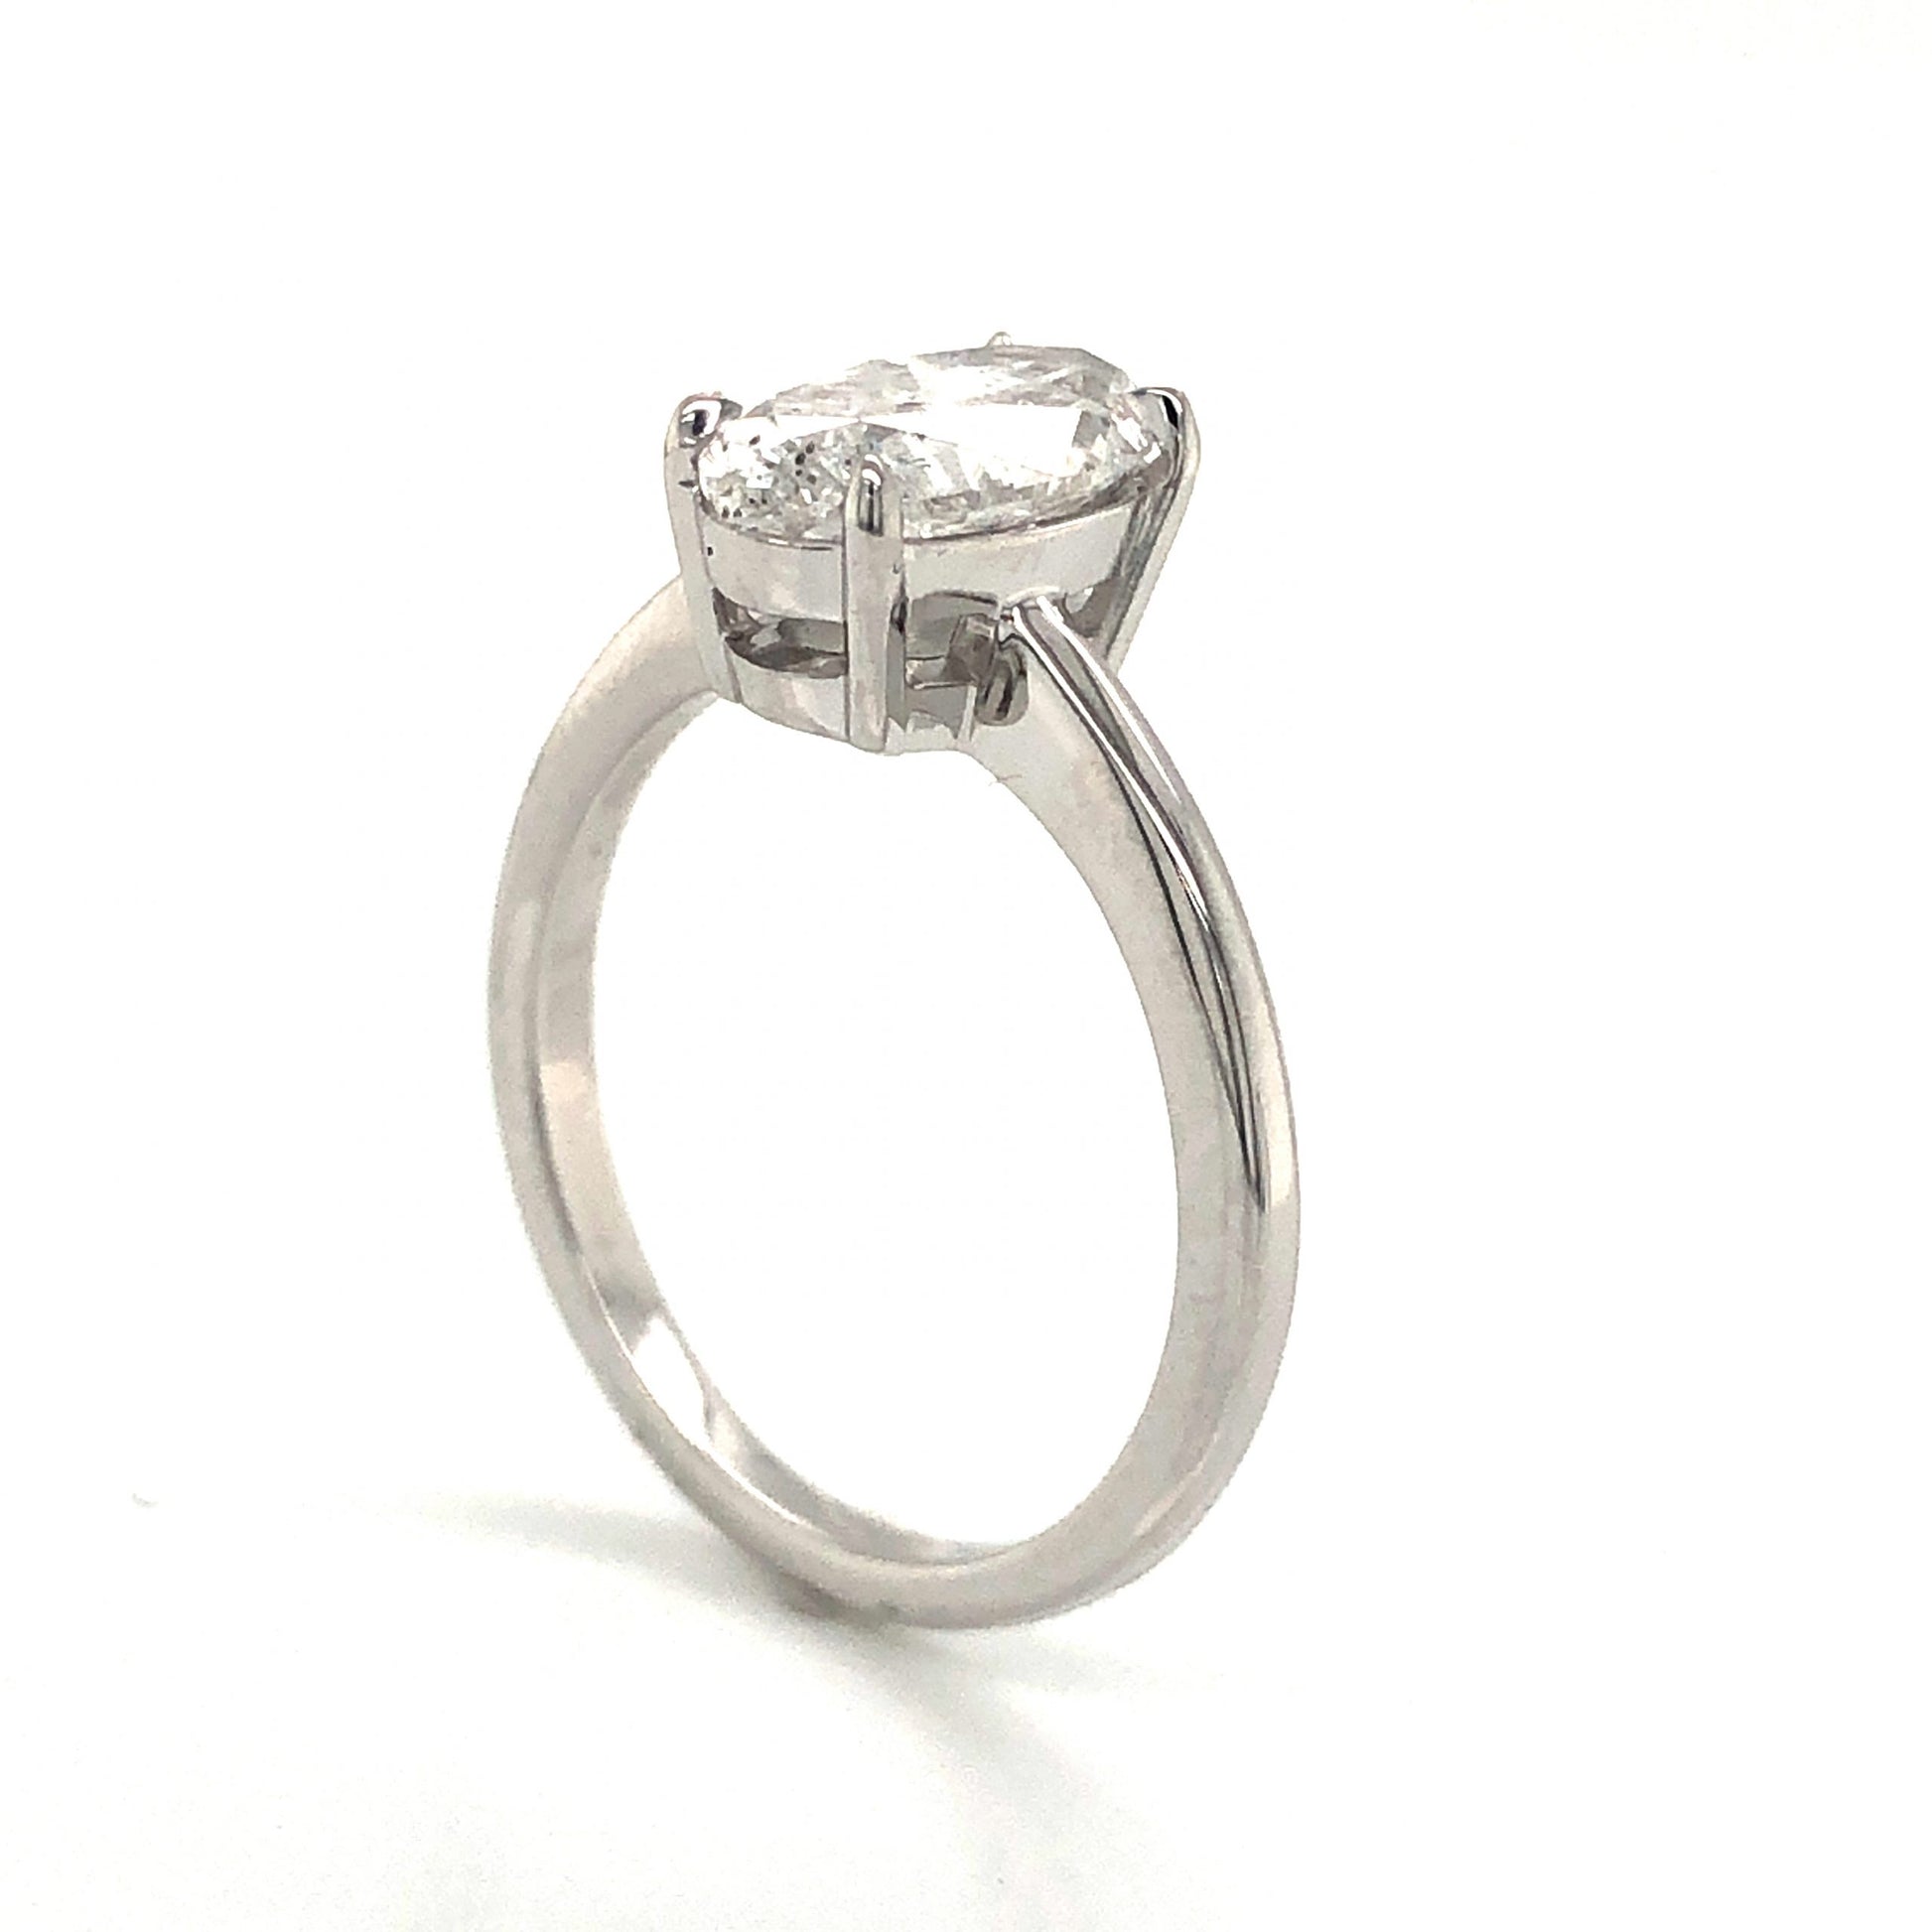 1.78 Oval Cut Diamond Engagement Ring in 14k White GoldComposition: Platinum Ring Size: 6 Total Diamond Weight: 1.78ct Total Gram Weight: 3.3 g Inscription: 14k
      